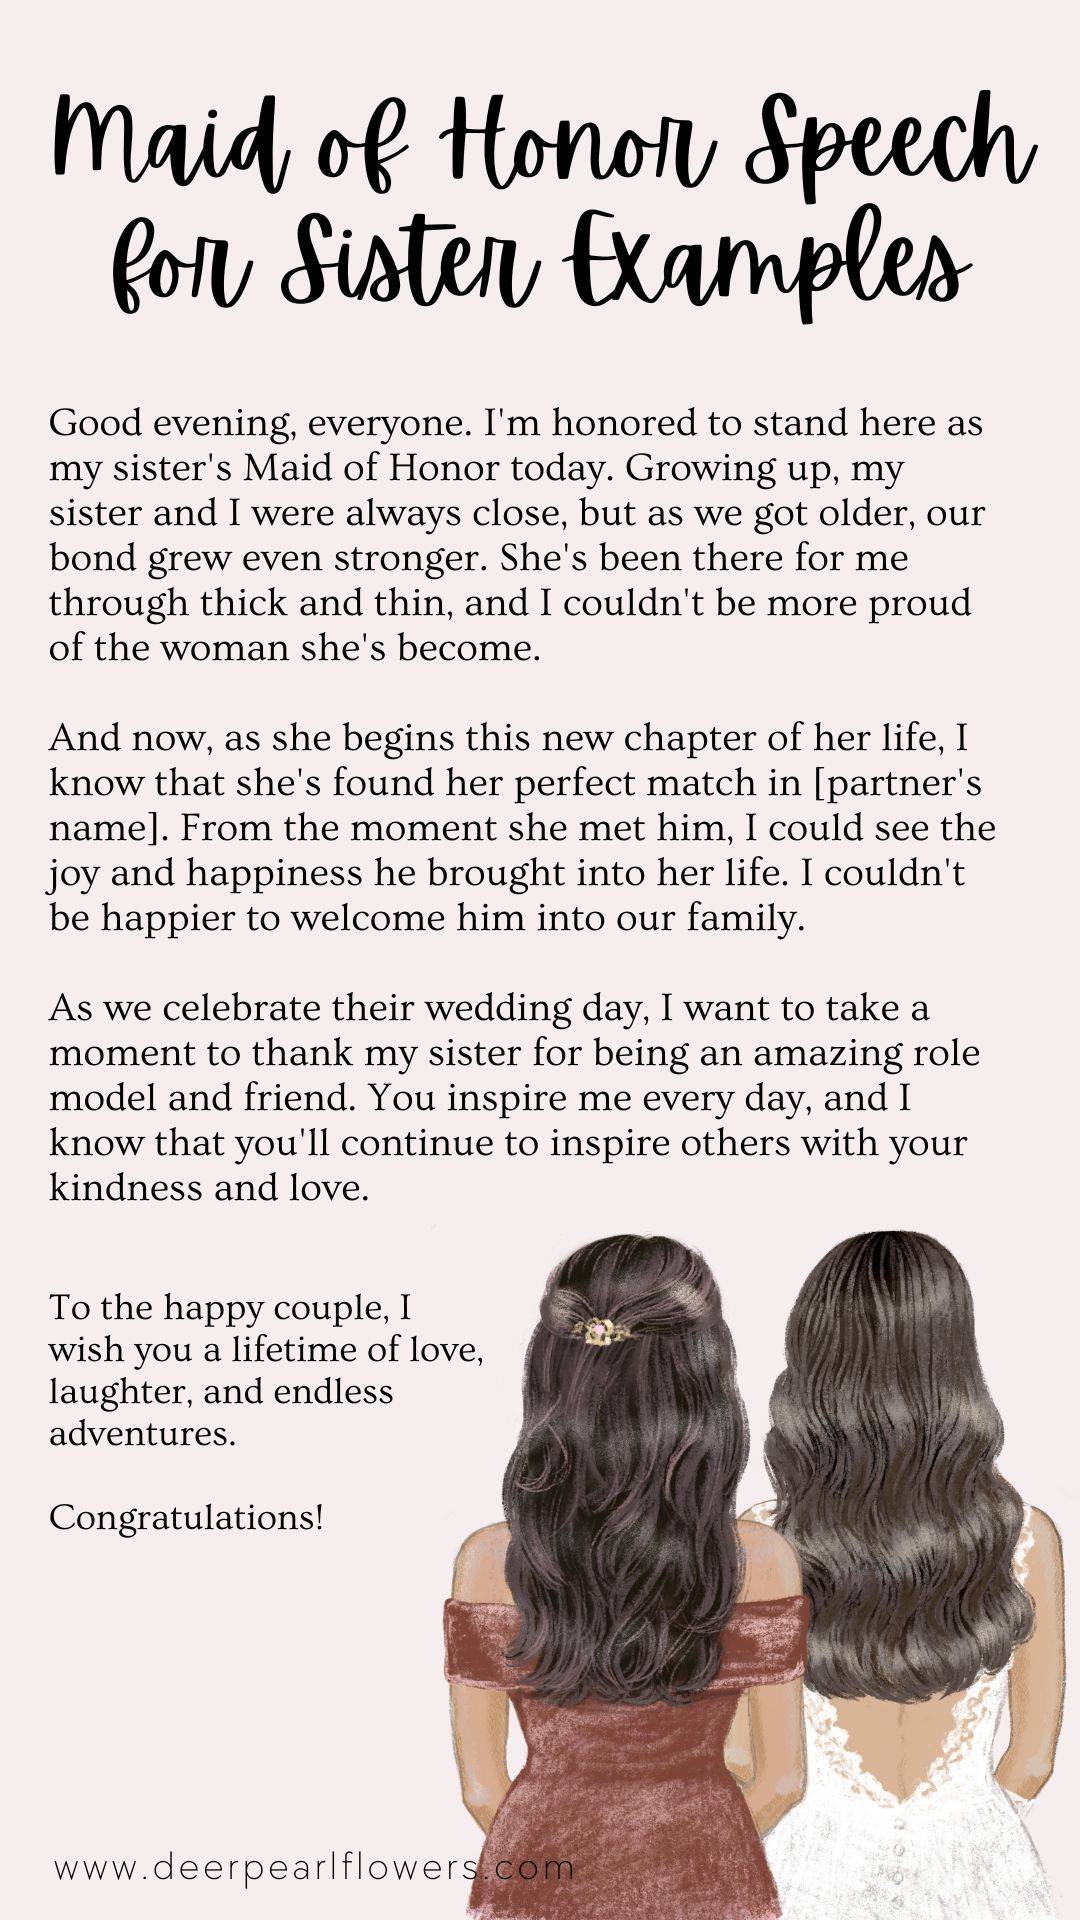 maid of honor speech examples sister funny